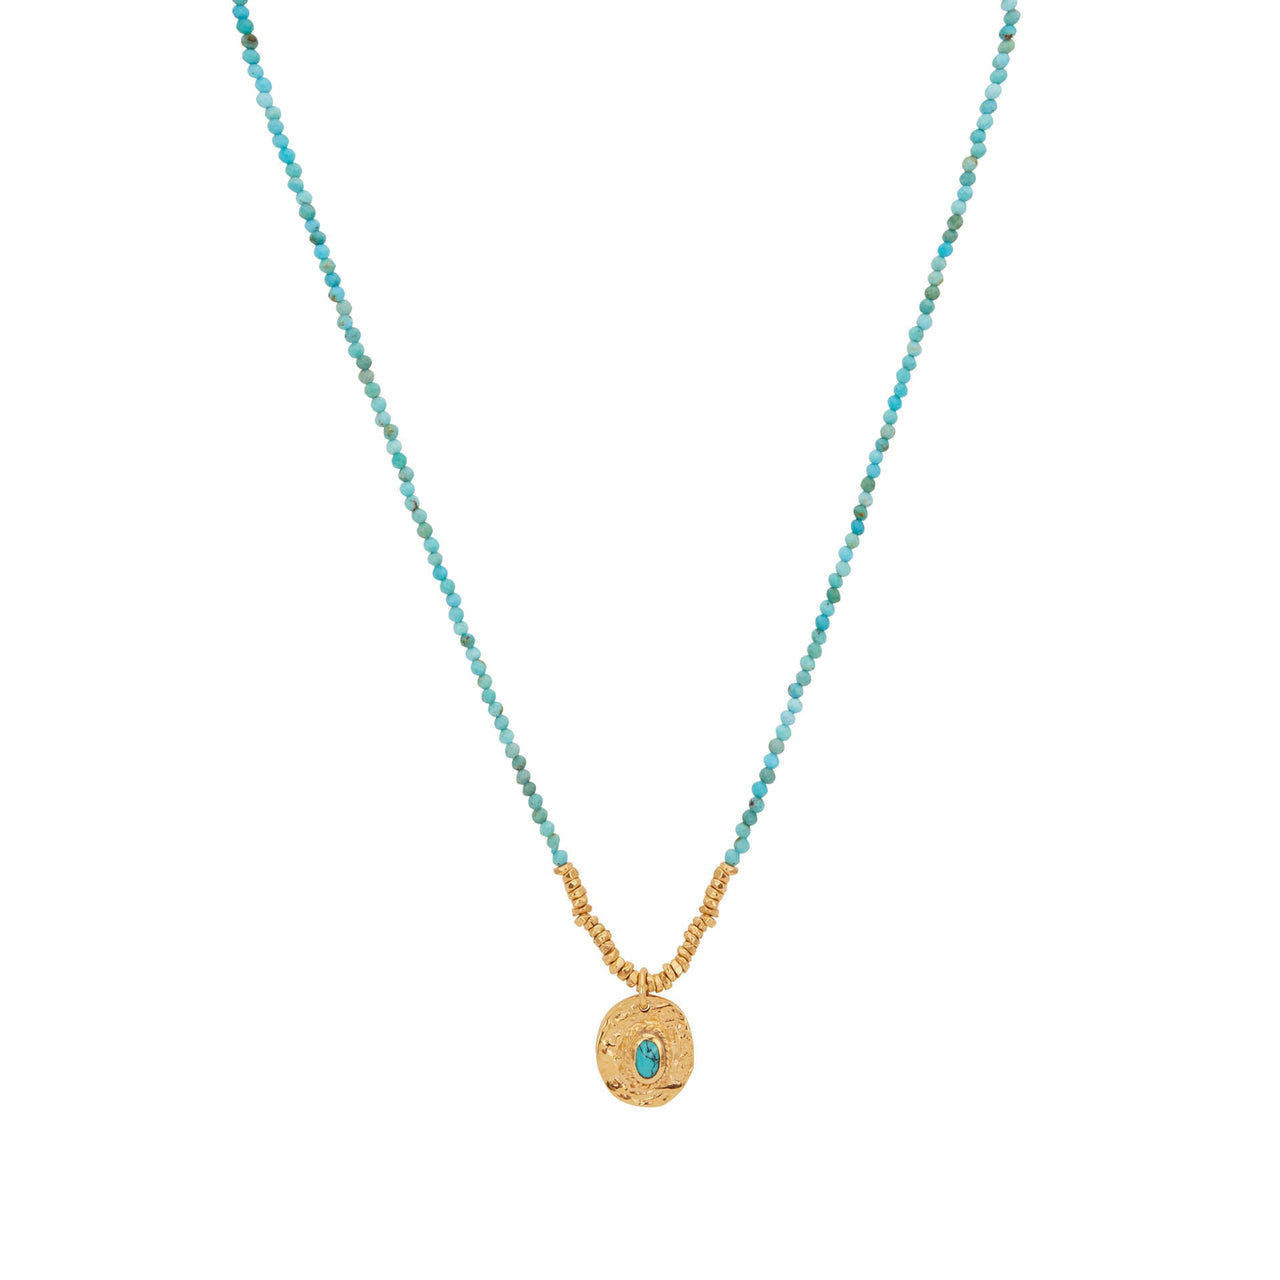 ARTEMIS SMALL TURQUOISE NECKLACE